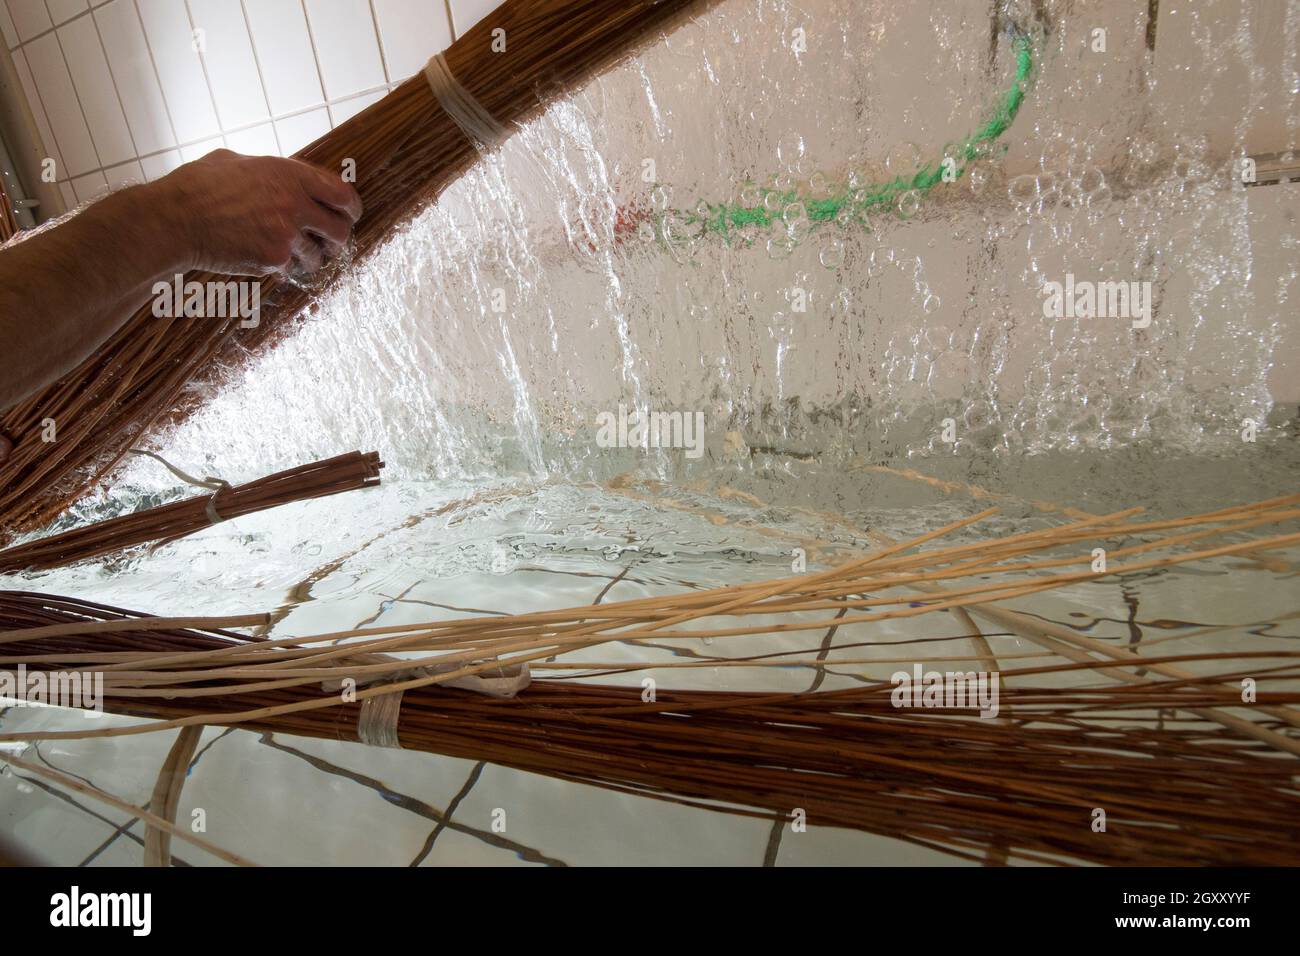 basket weaving in a sheltered workshop, work with disabled or handicapped people Stock Photo